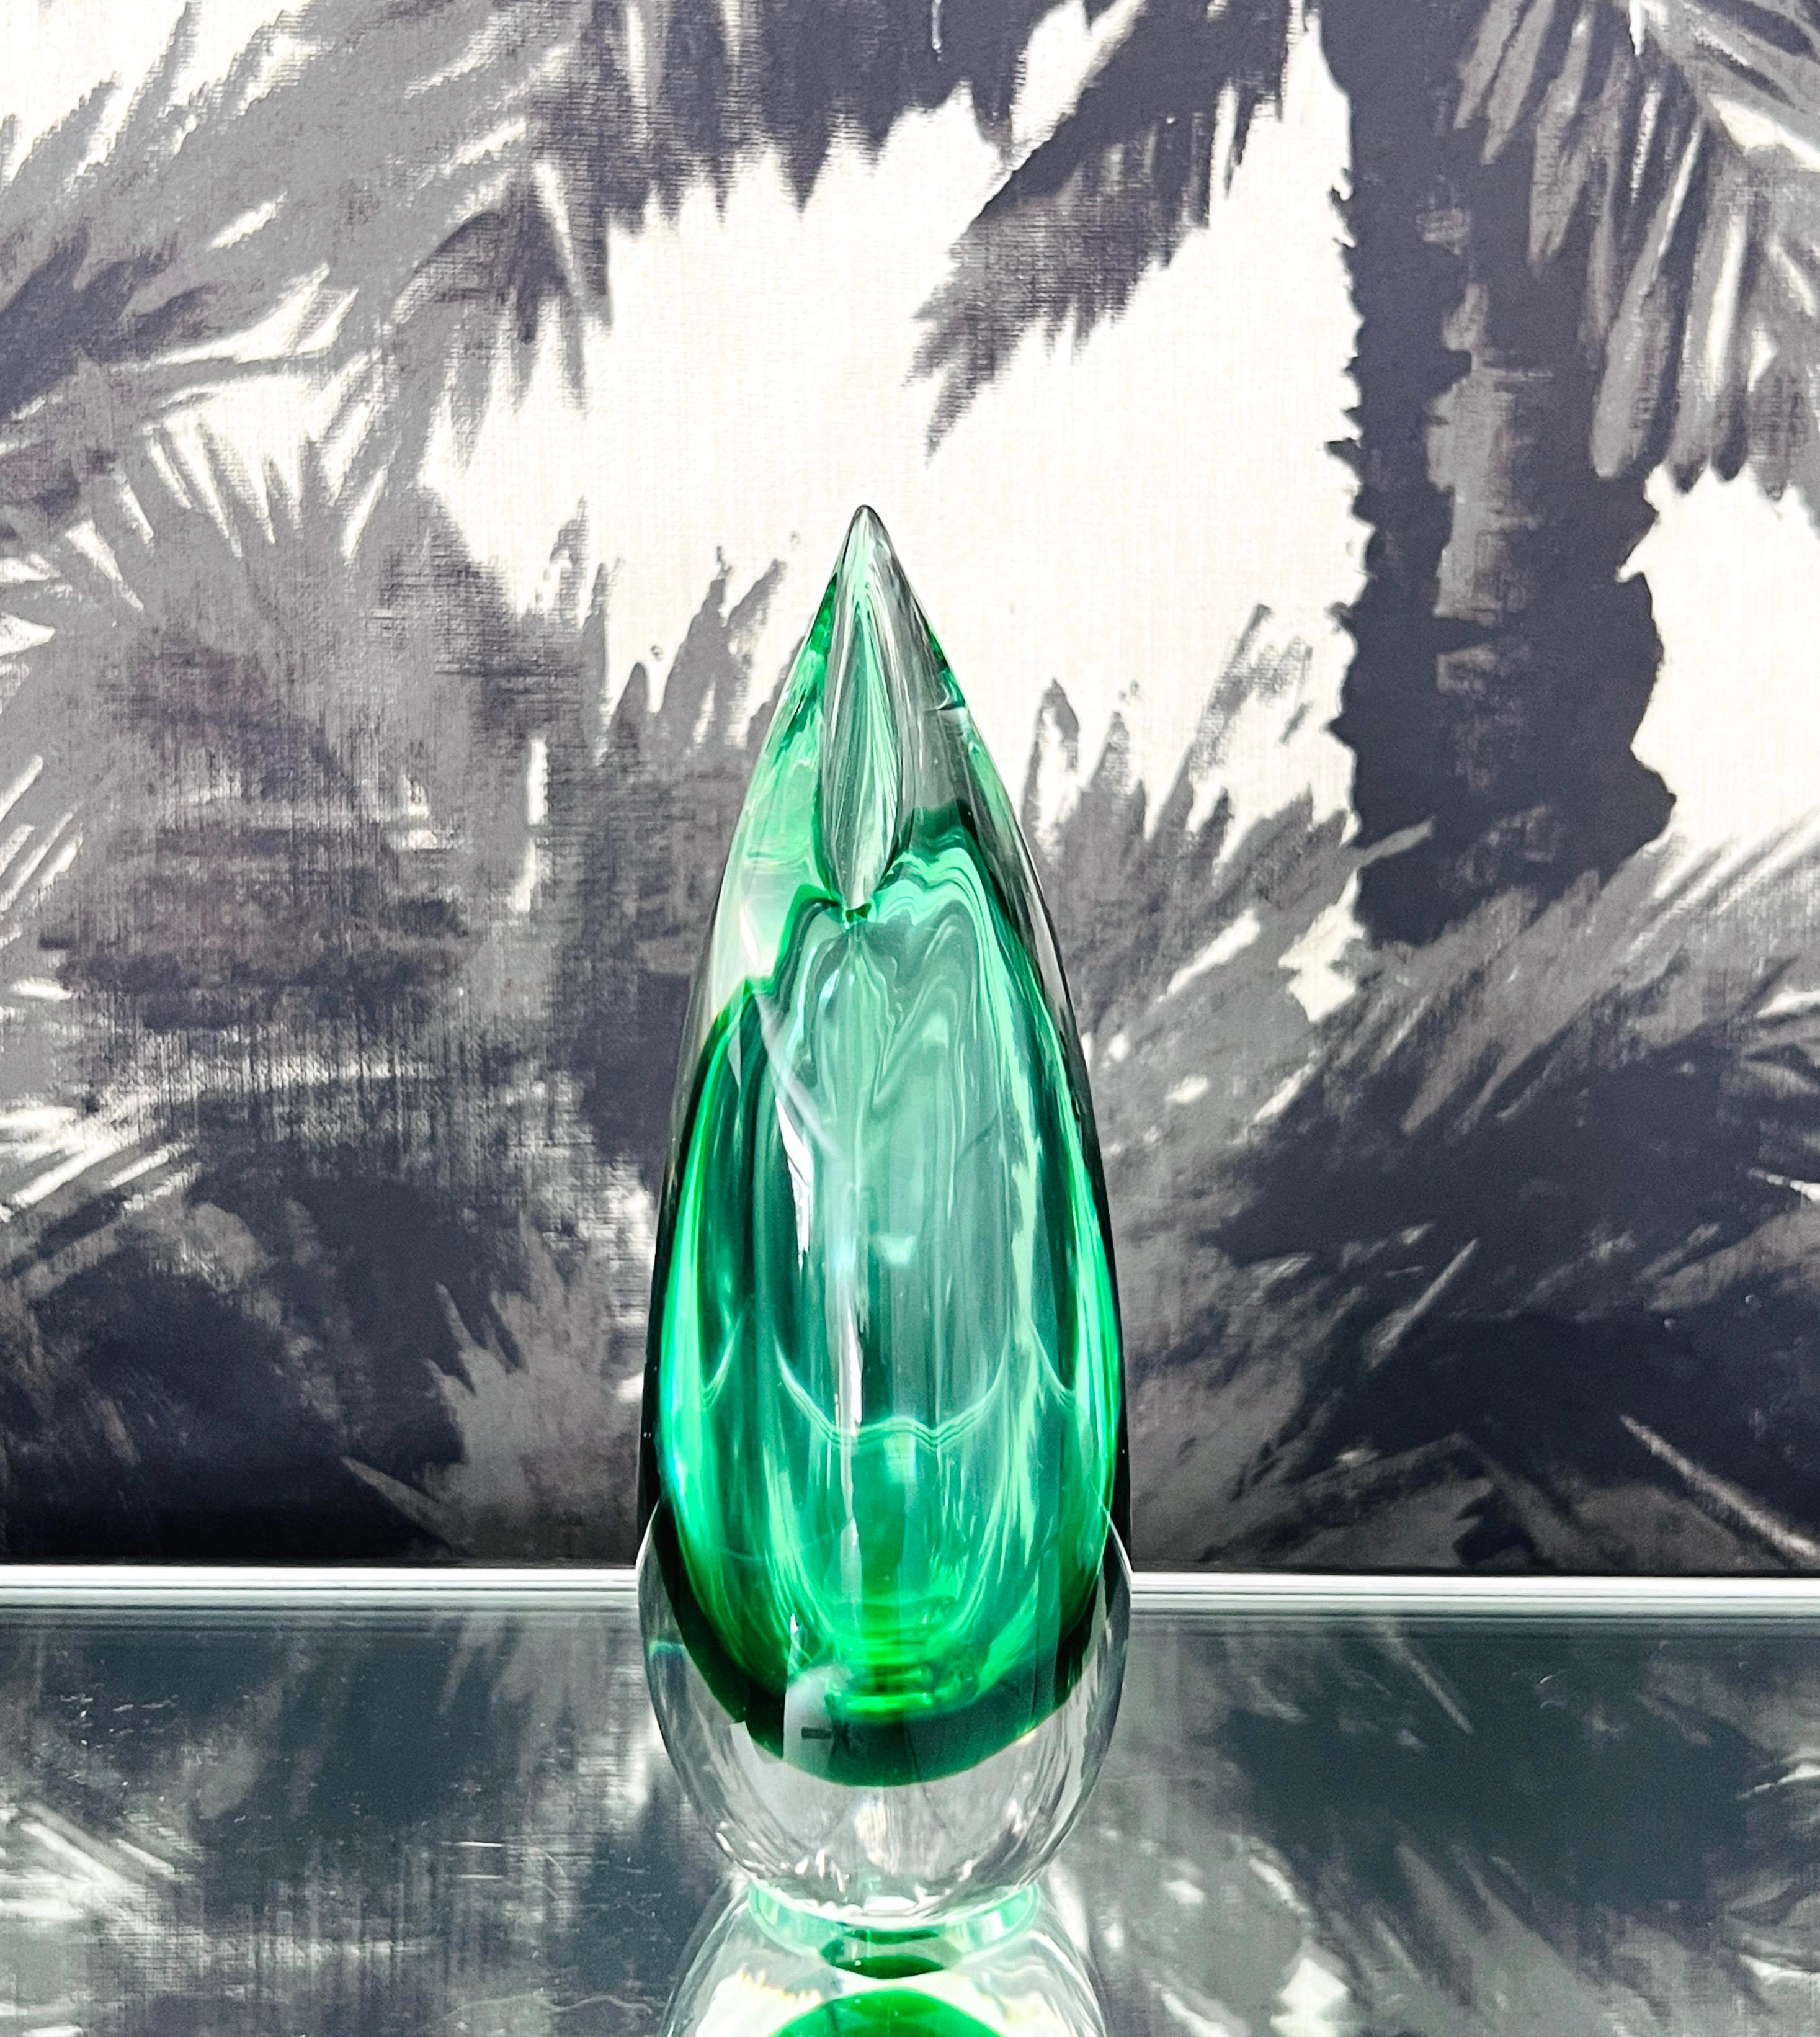 Blown Glass Green Murano Glass Bud Vase with Flame Tip Design by Luigi Onesto, 1970's Signed